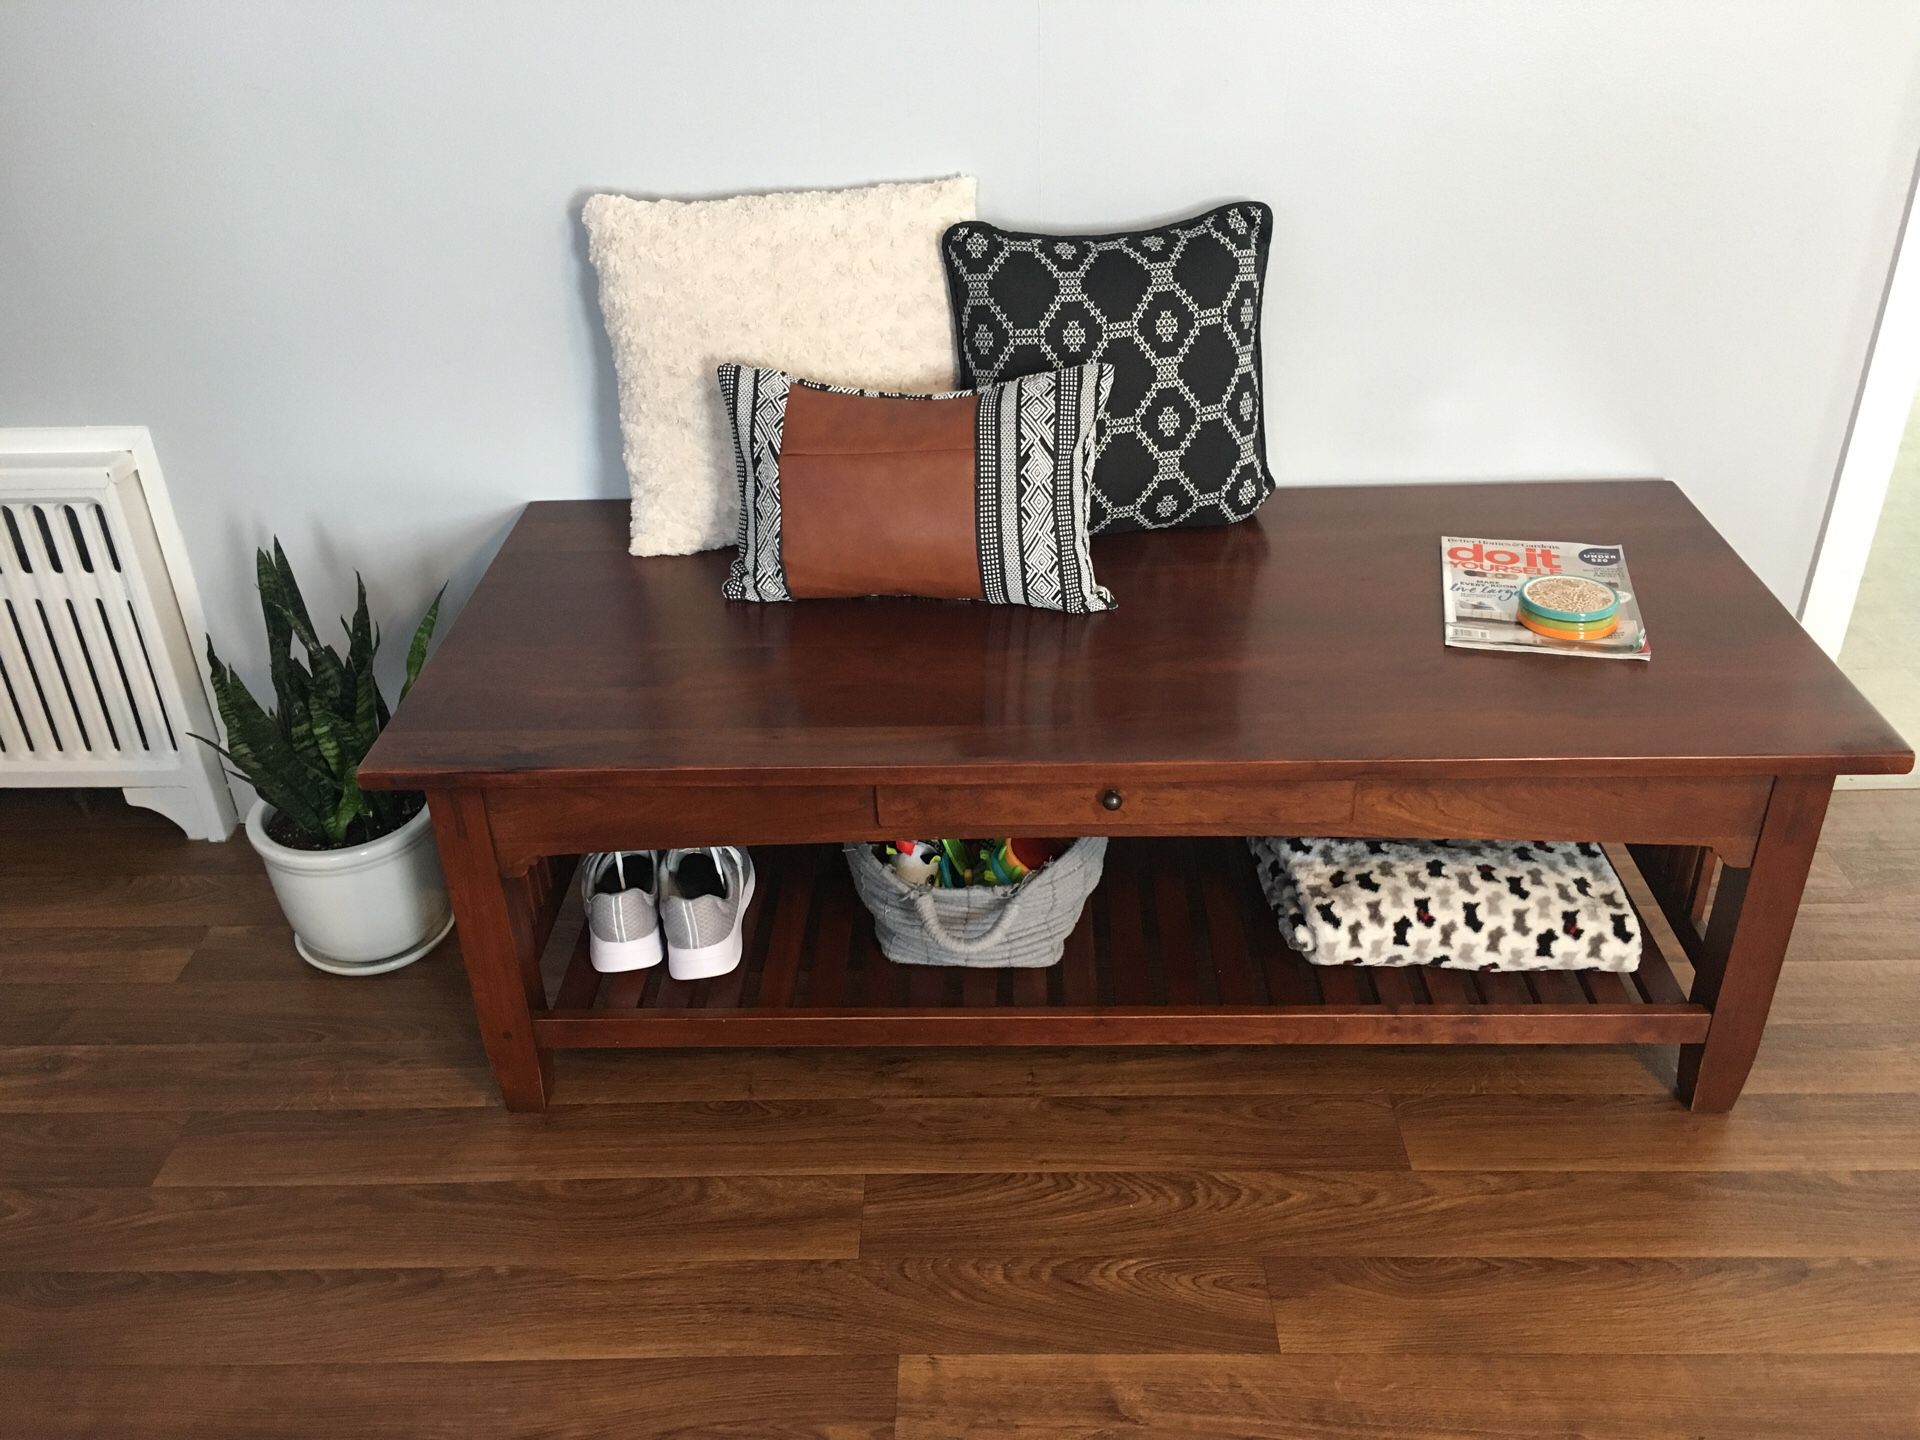 Coffee table (using as entry way bench)